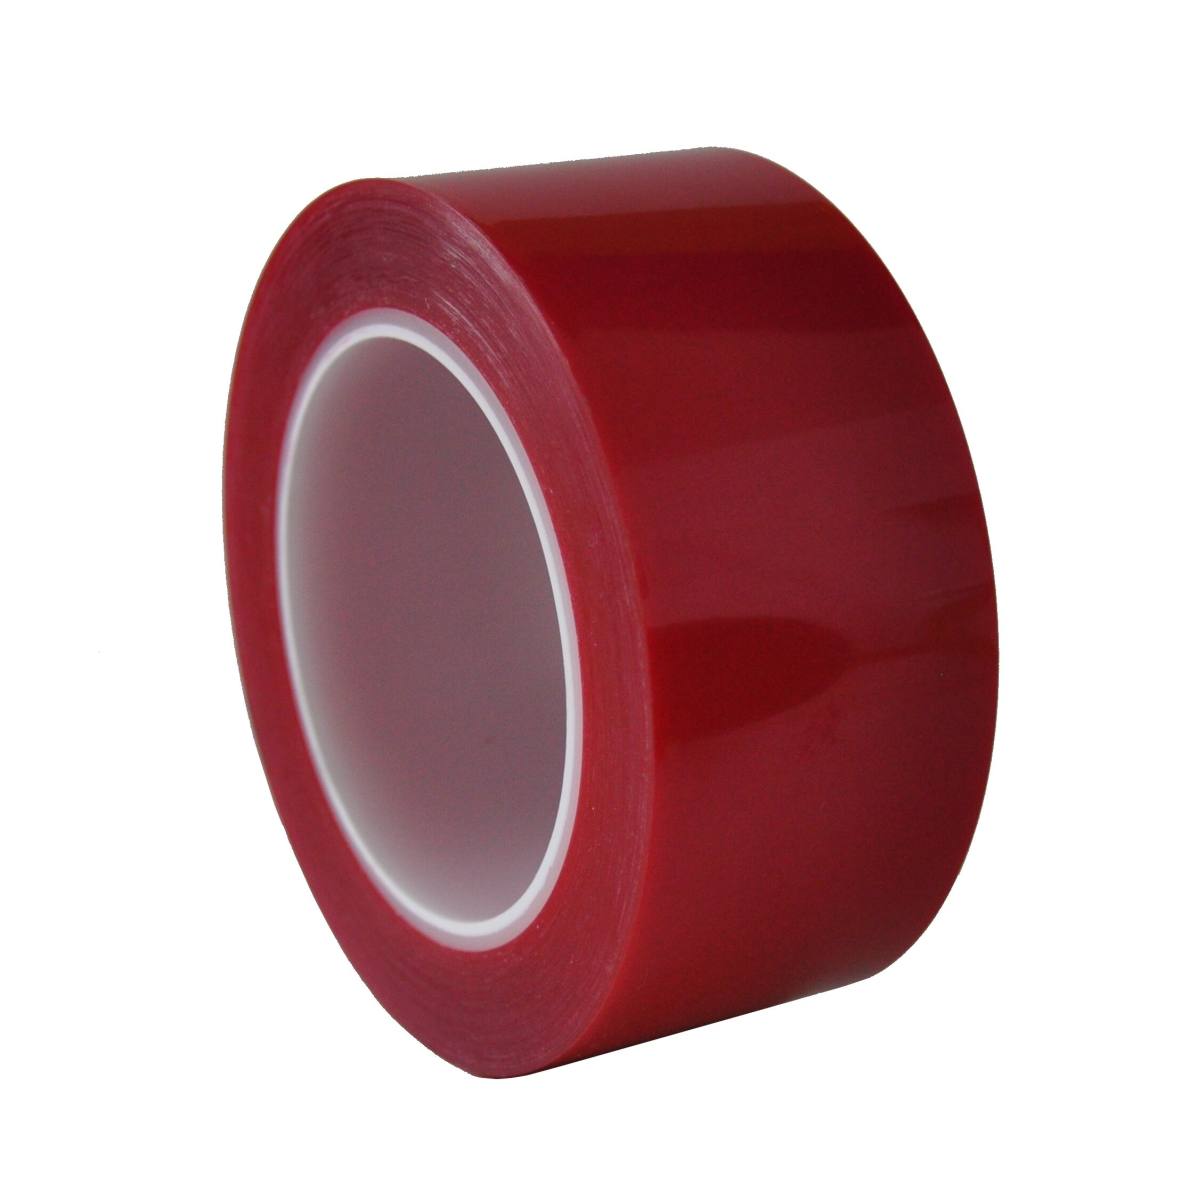 S-K-S 208R Polyester adhesive tape, 12mmx66m, red